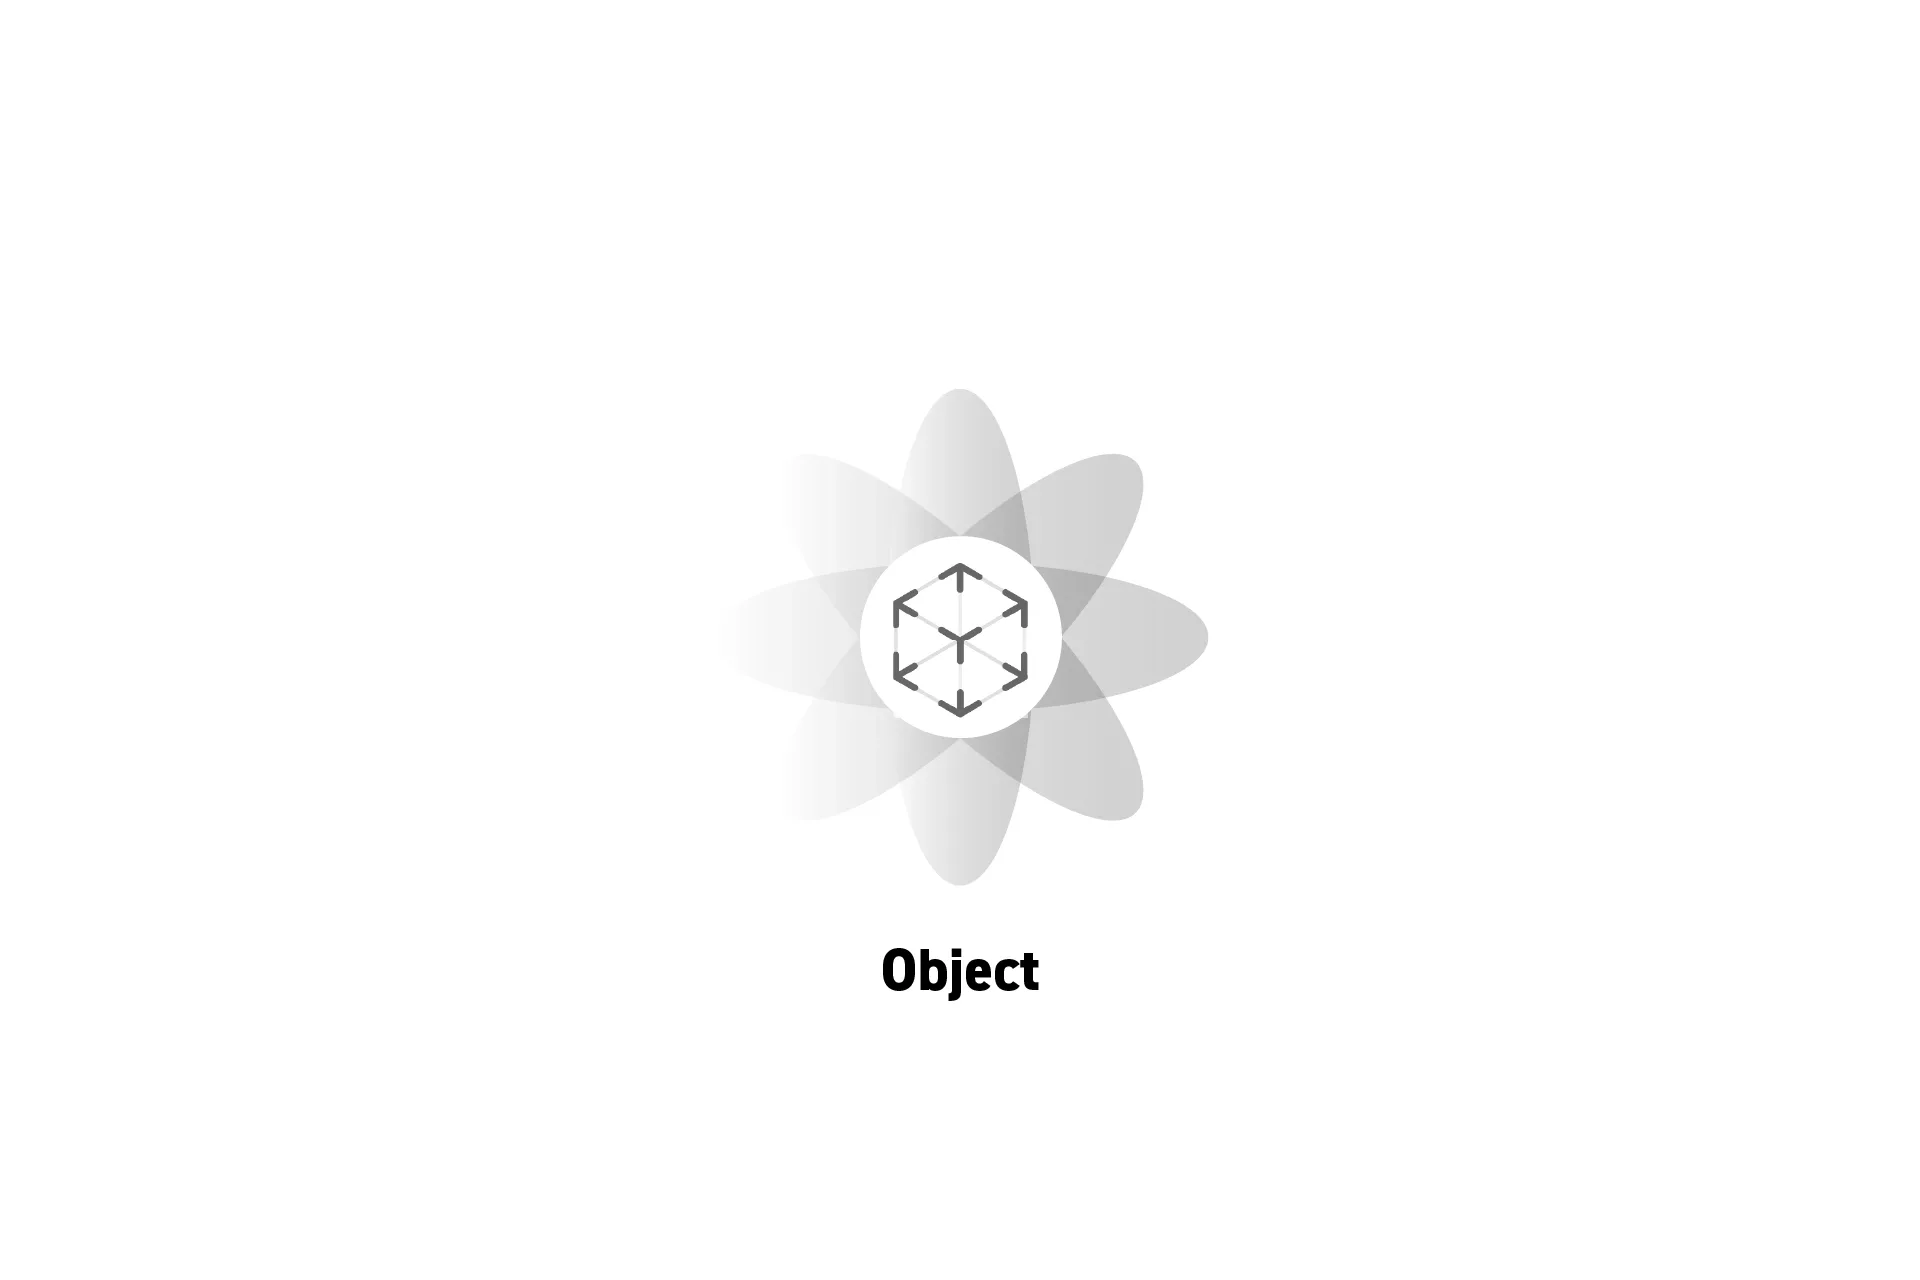 A flower that represents spatial computing with the text "Object" beneath it.